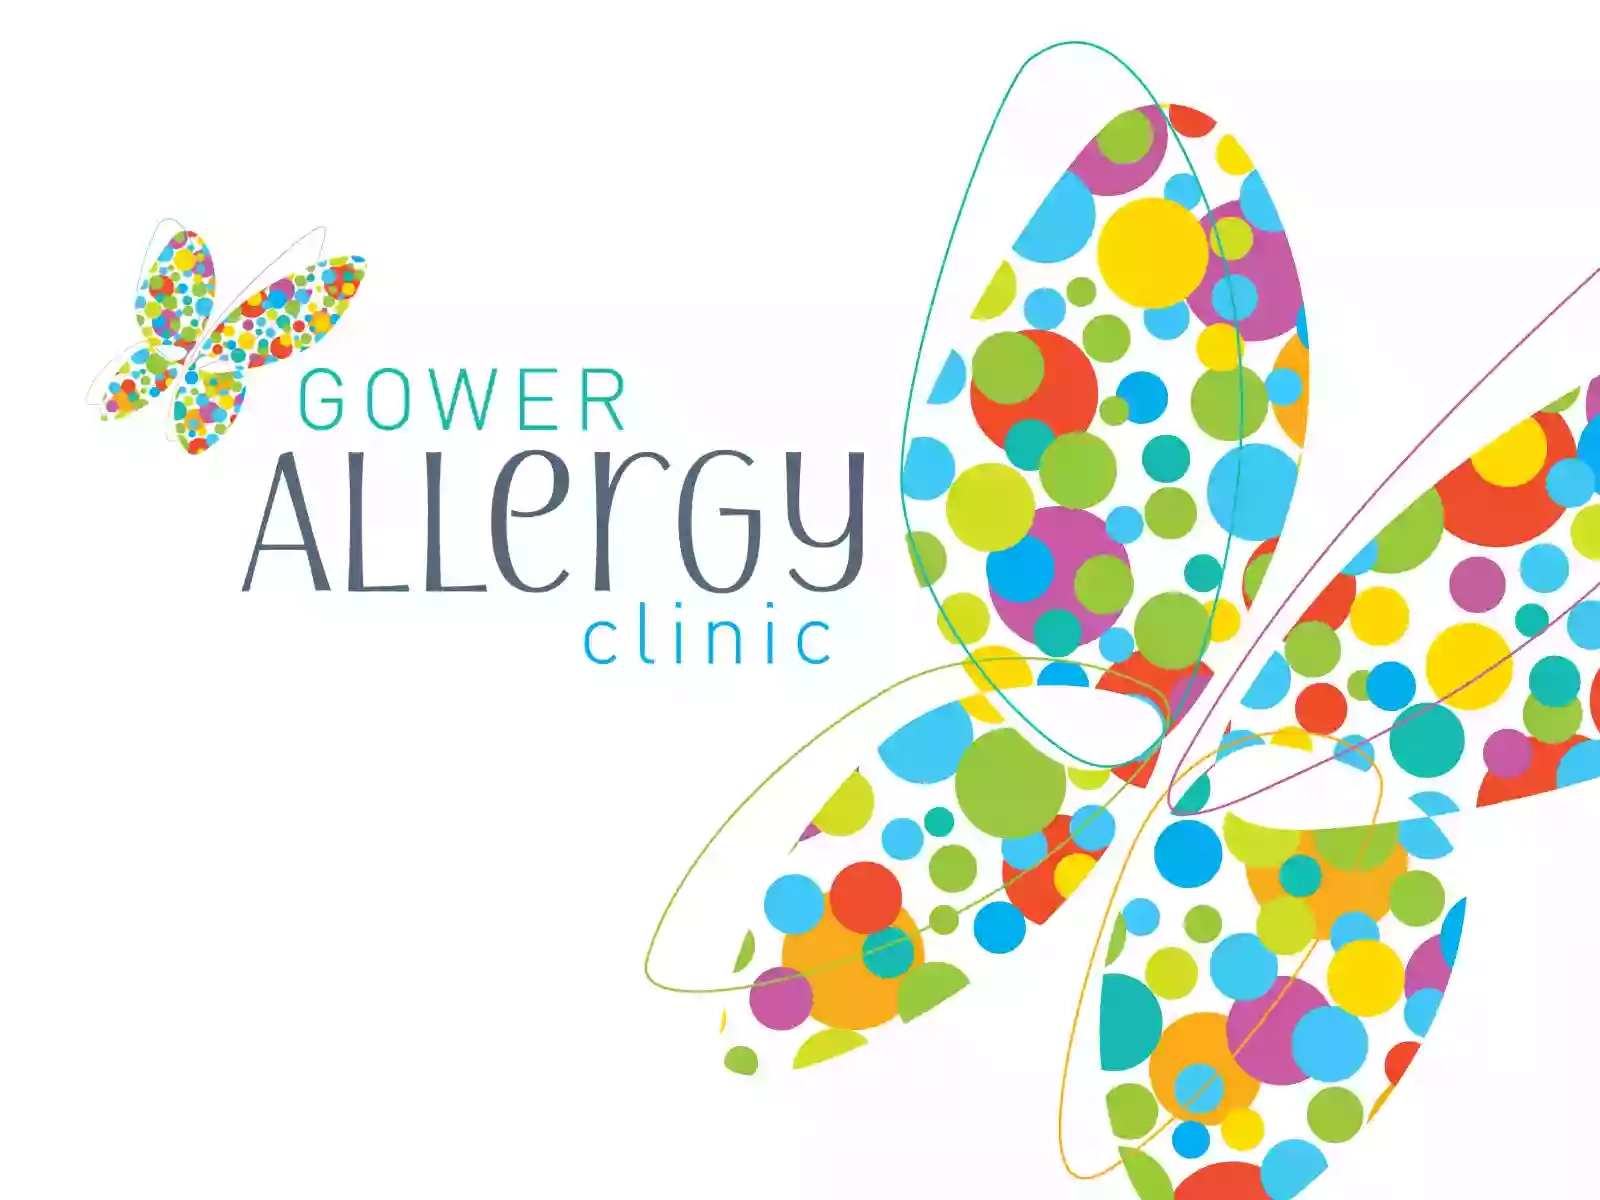 Gower Allergy Clinic